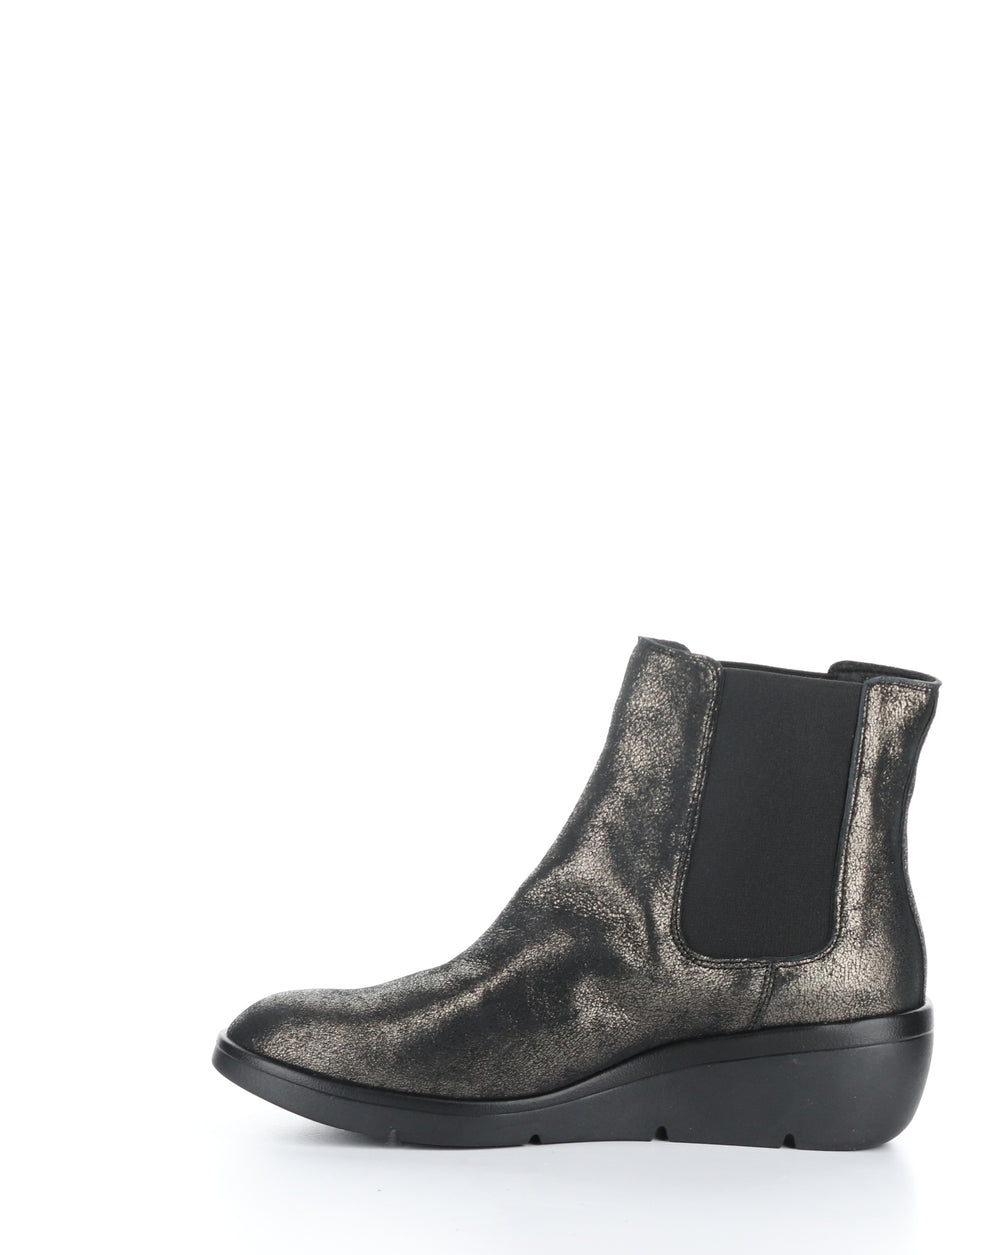 NOLA549FLY 011 GRAPHITE Elasticated Boots